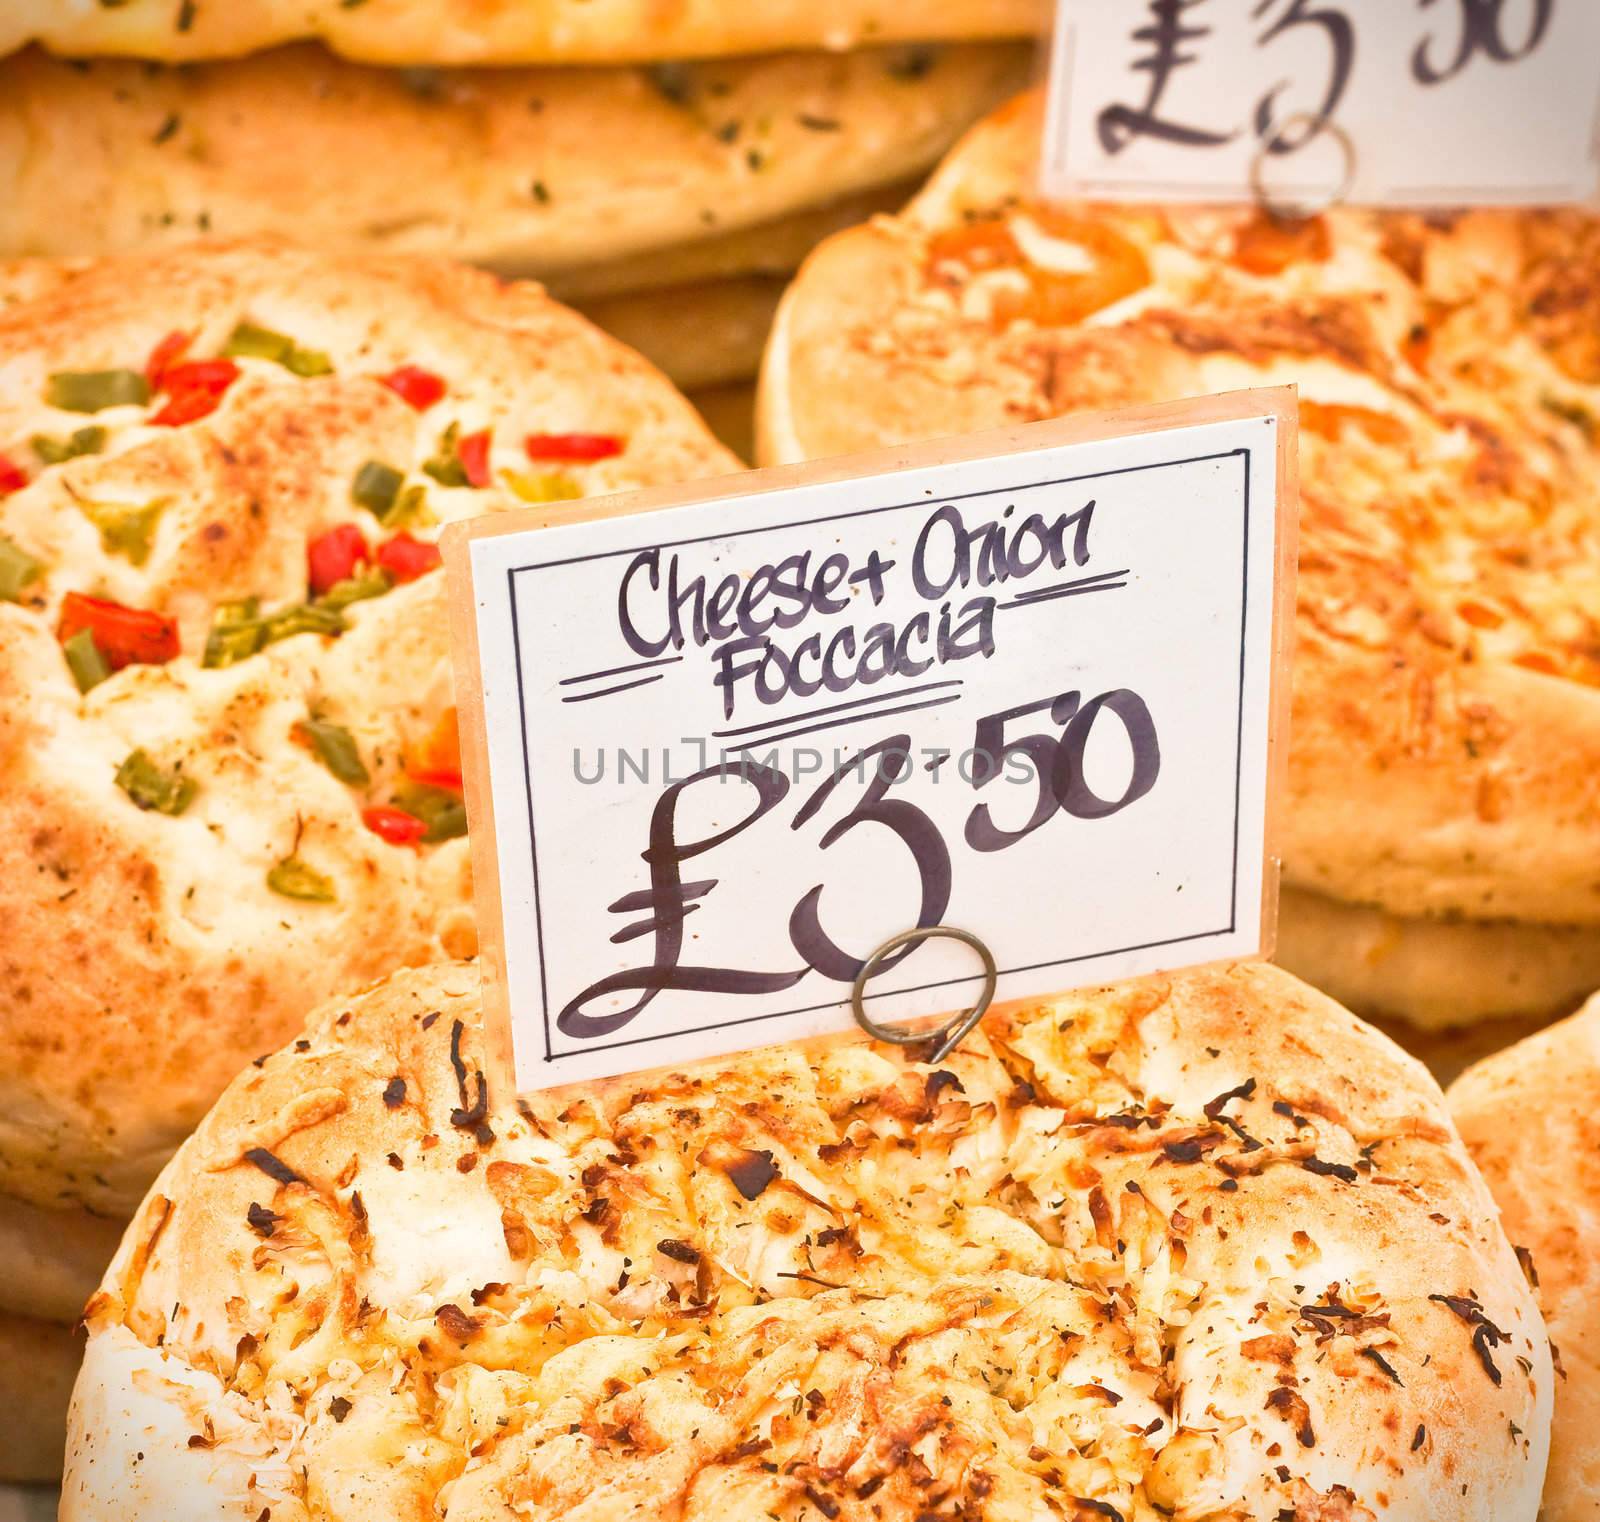 Freshly baked italian foccacia at a market stall in the UK